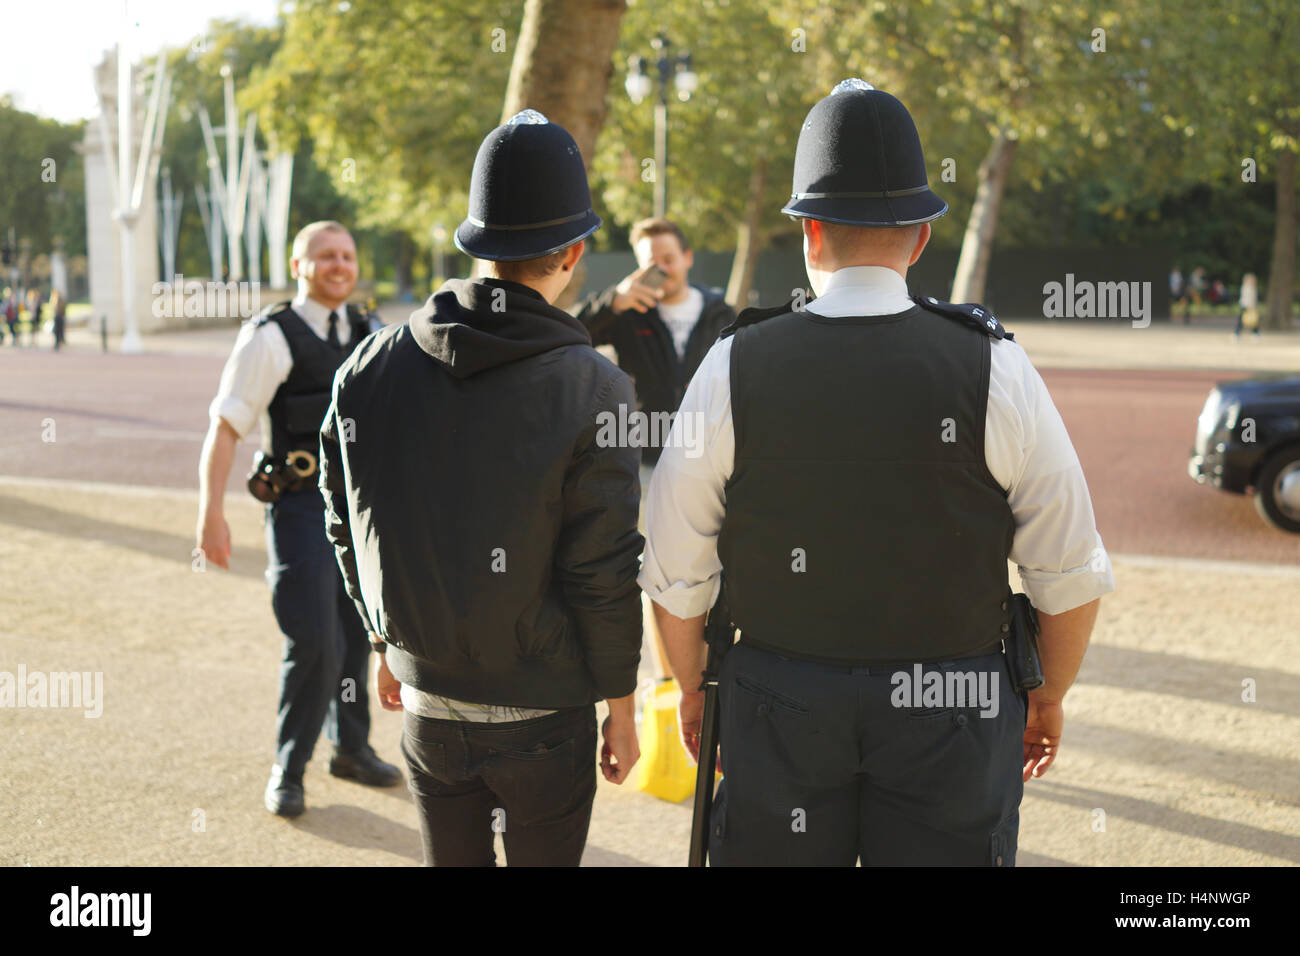 Friendly policeman lends his hat to a tourist in London Stock Photo